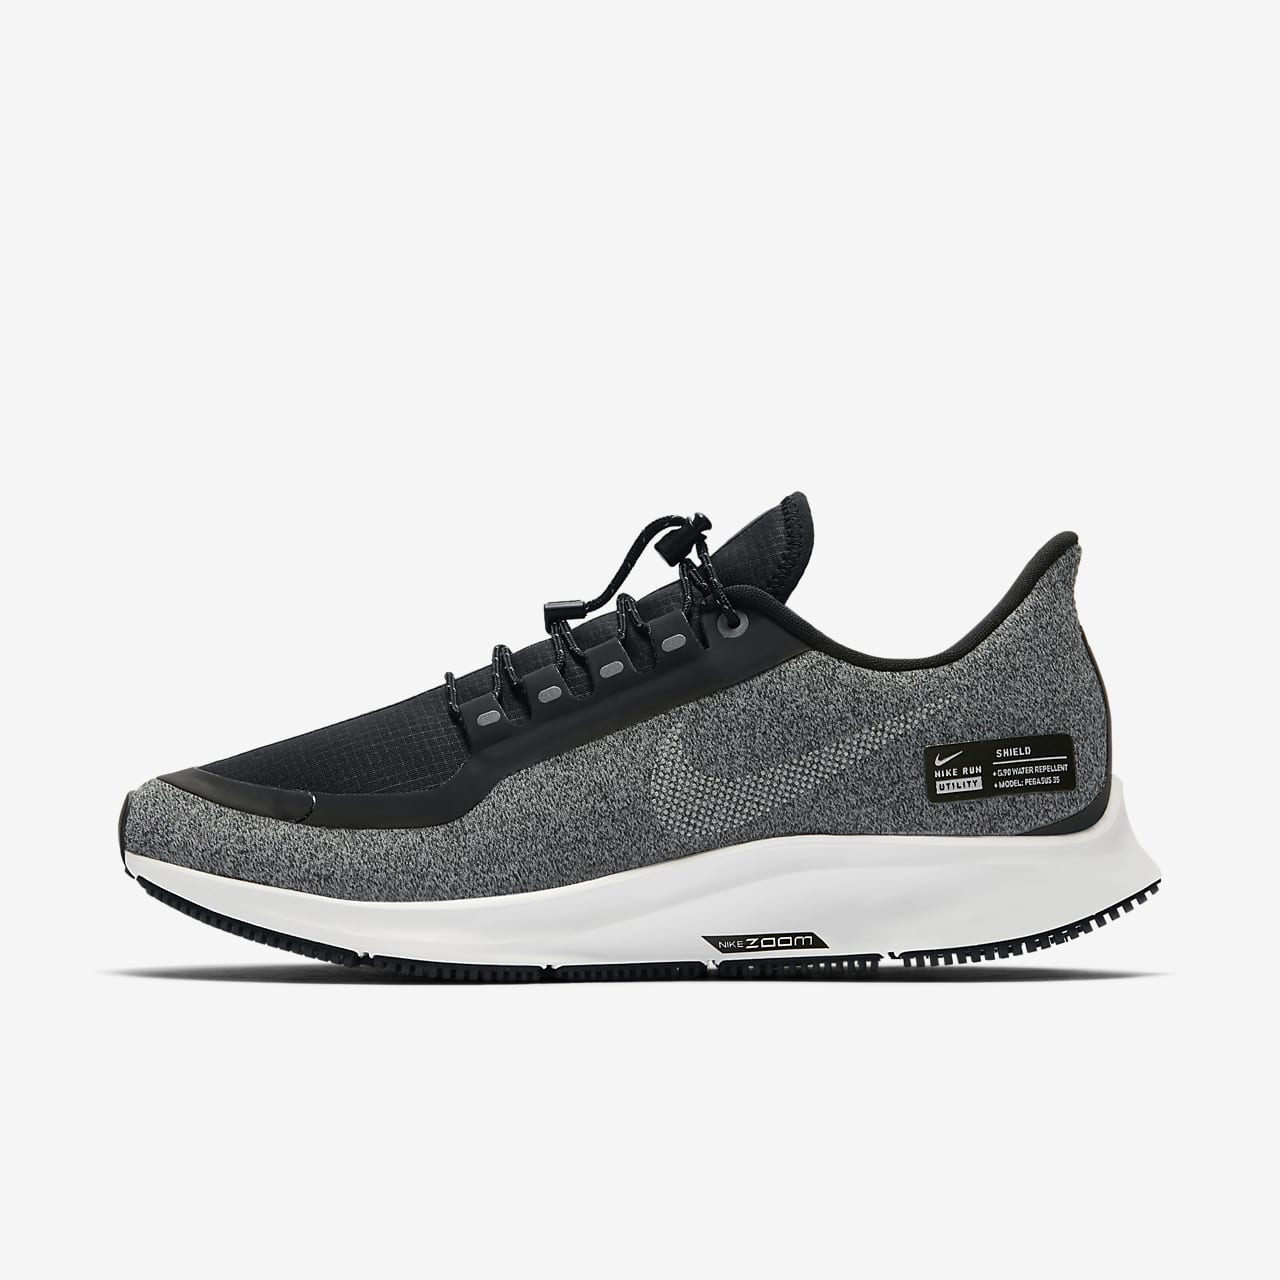 nike women's water resistant shoes